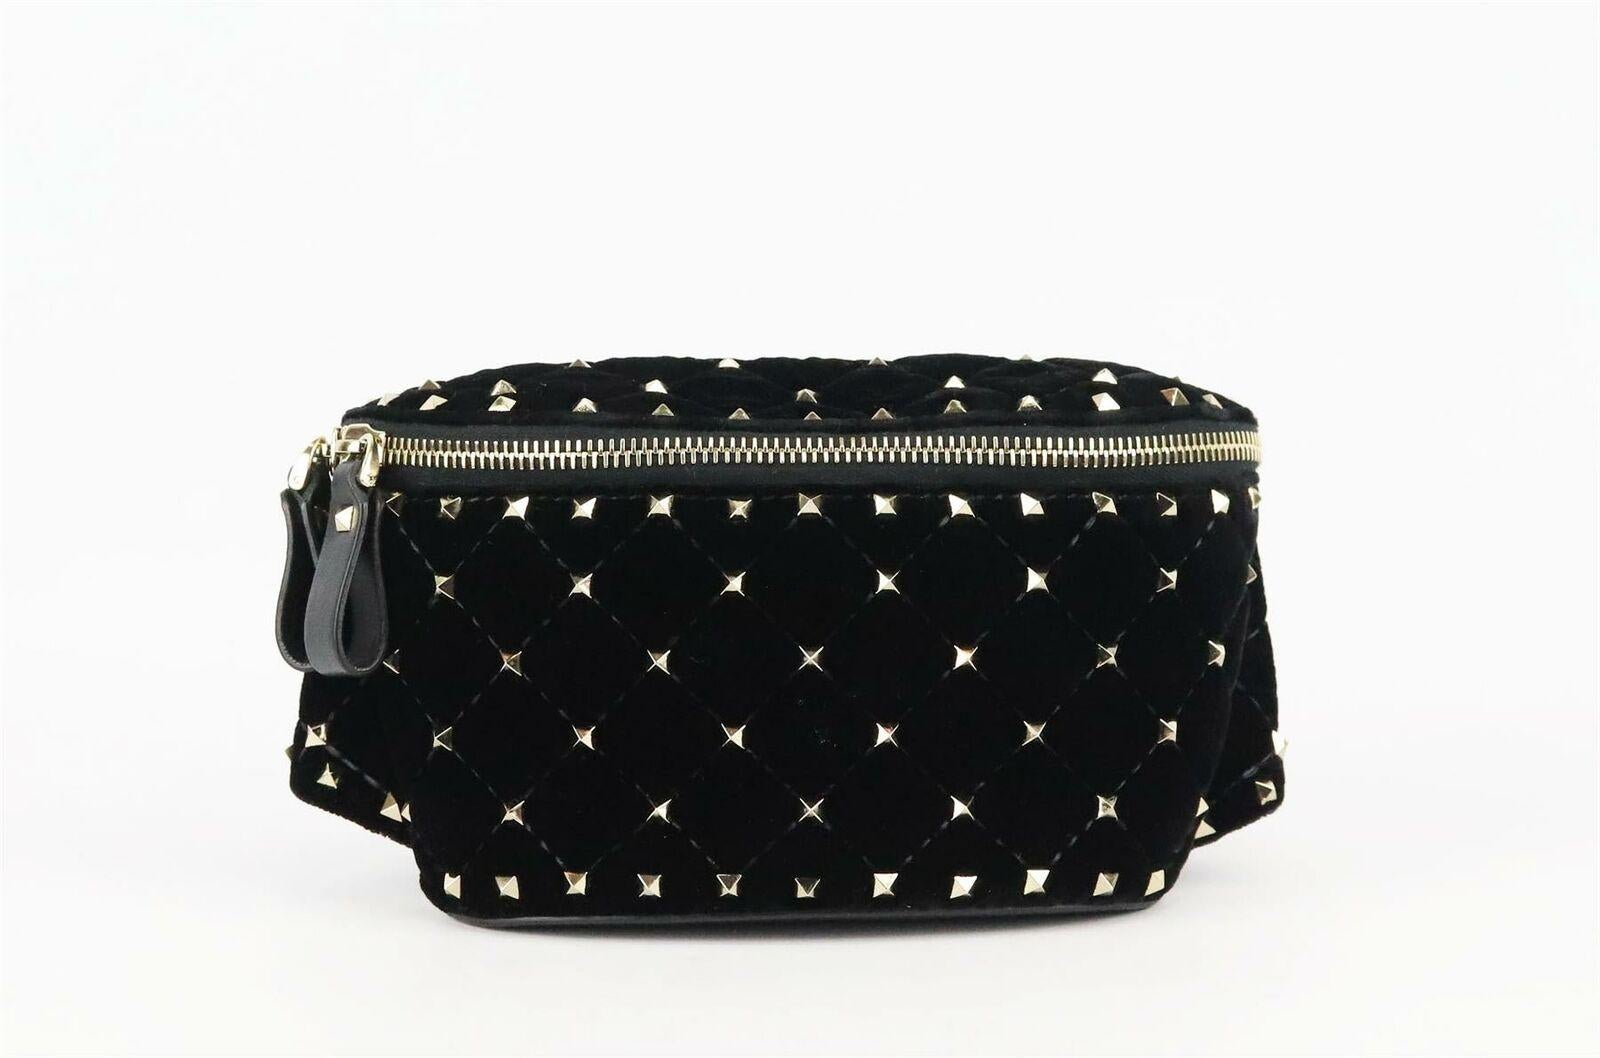 This Valentino Garavani belt bag has been made in Italy from black velvet that's punctuated with hand-applied 'Rockstud' spikes to accentuate the quilted finish, can easily fit you phone, keys inside and slip your cards in the back pocket.
Black